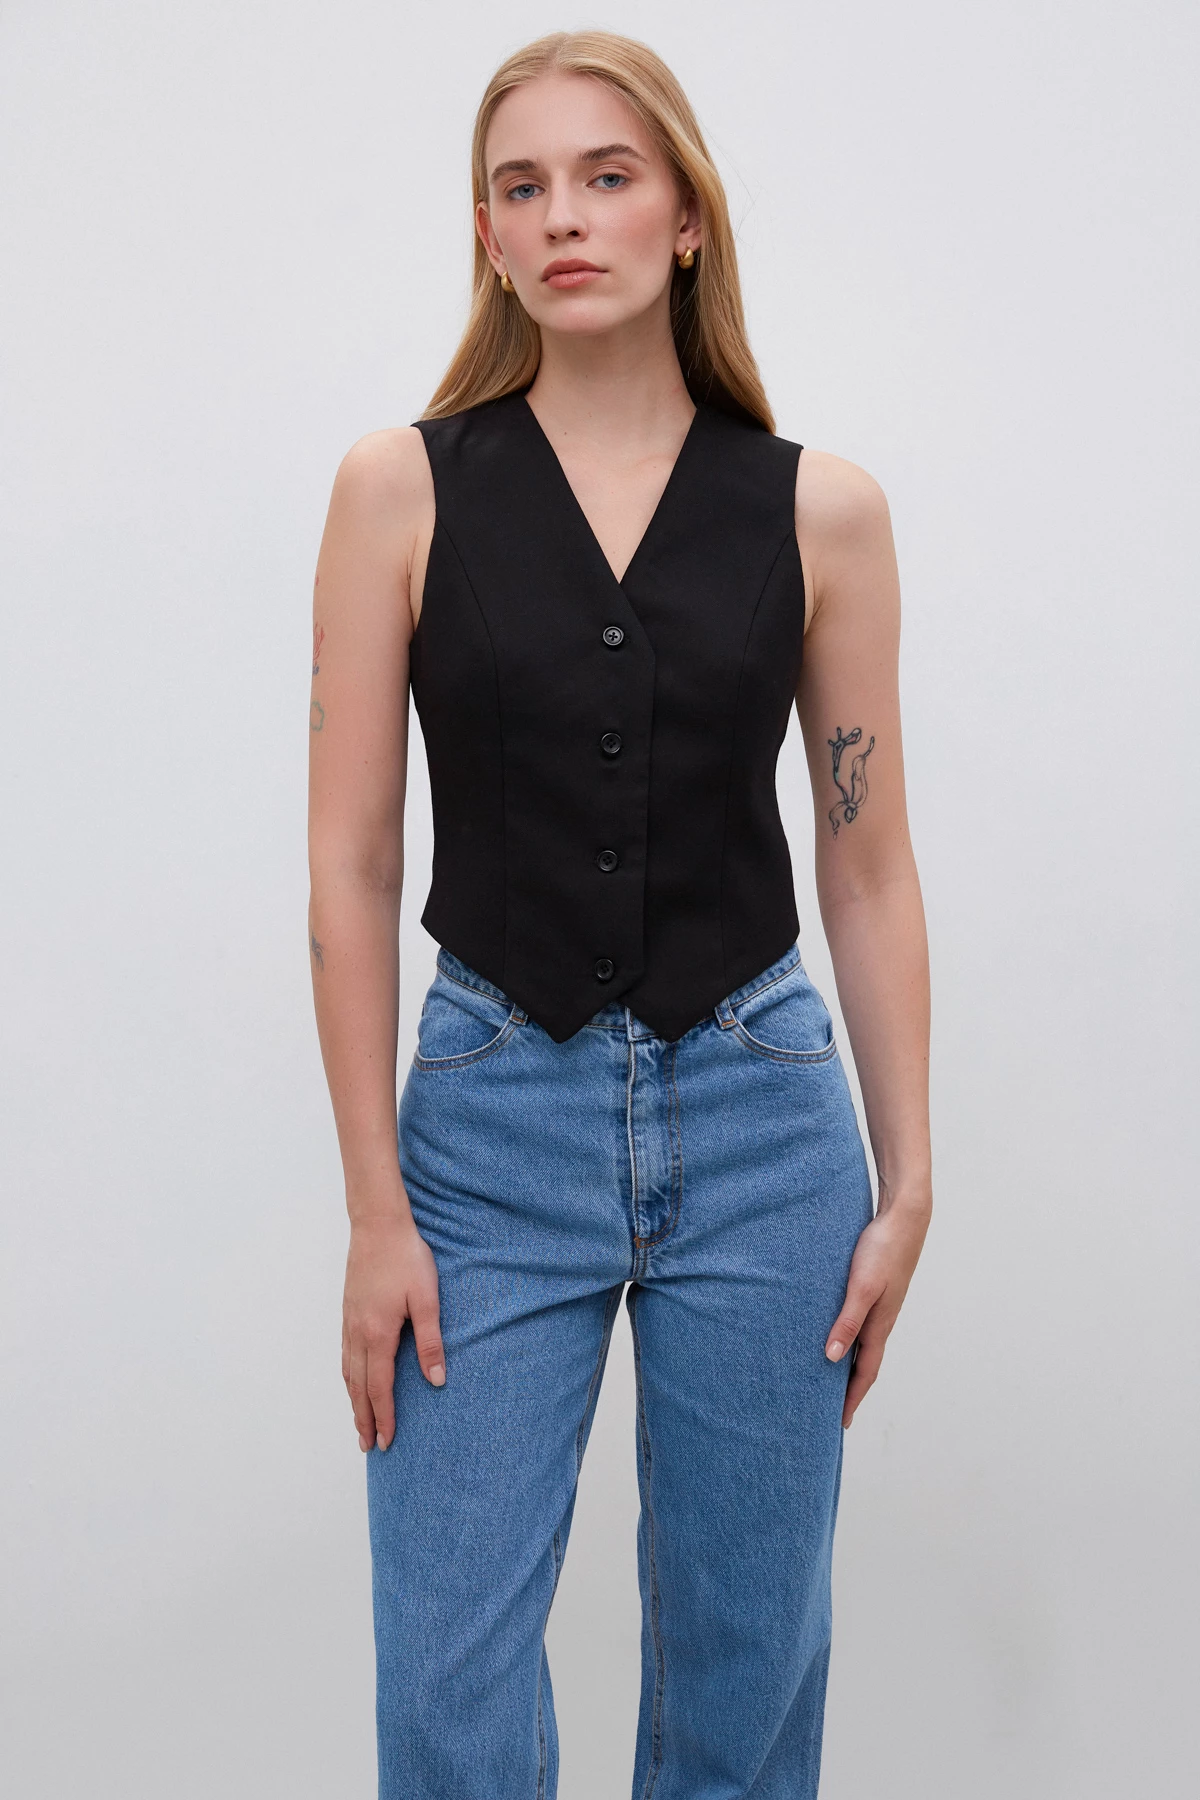 Black vest of classic cut with viscose, photo 1